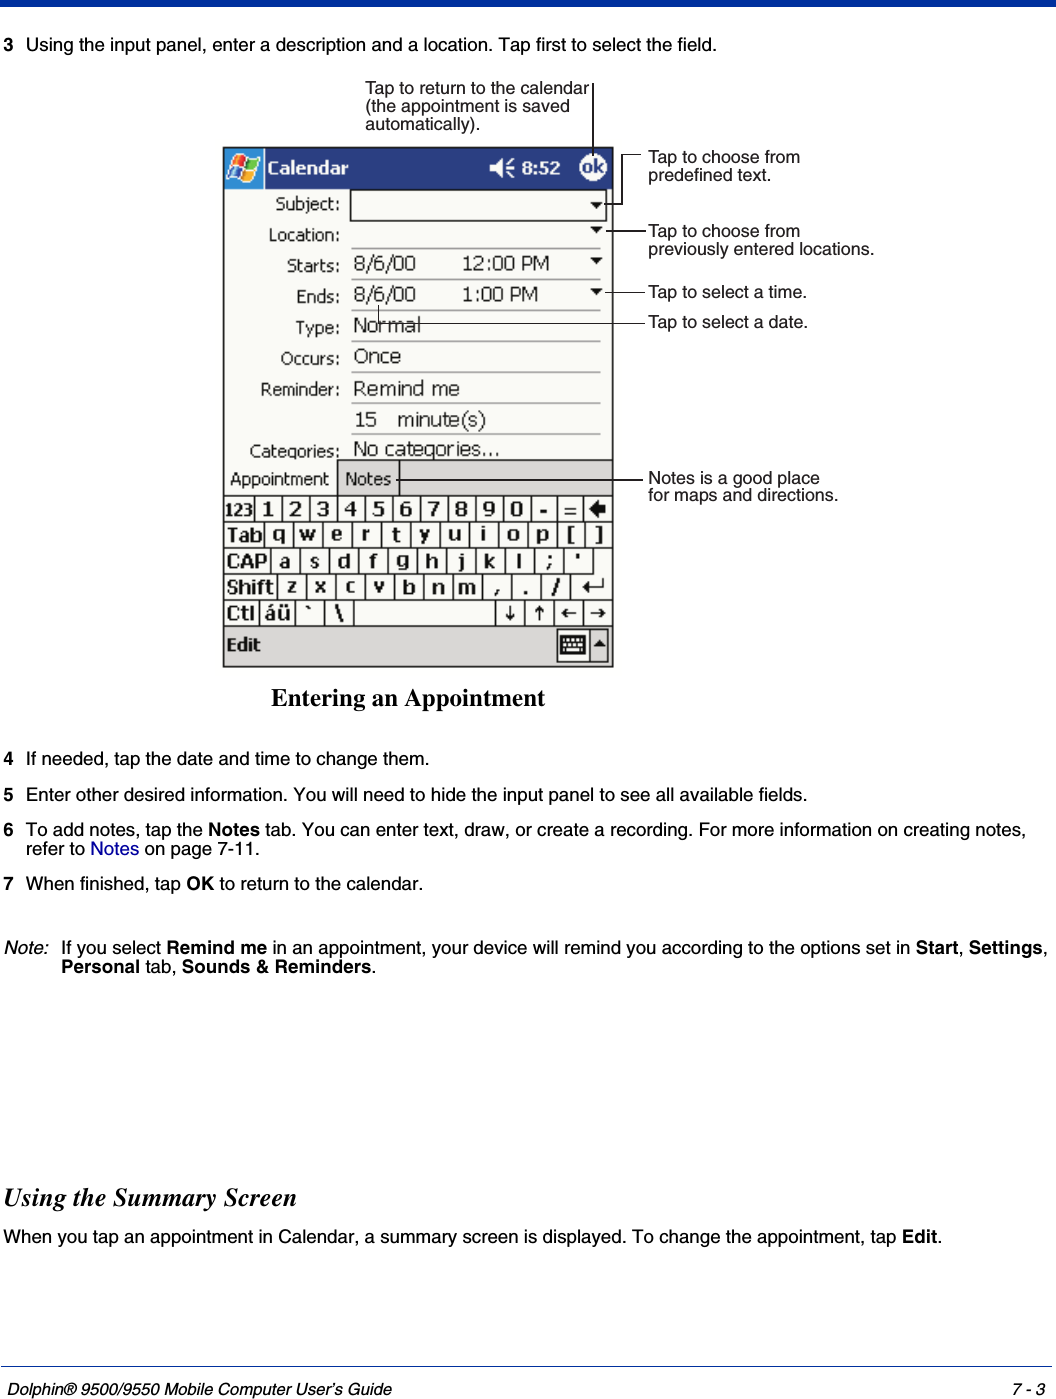 Dolphin® 9500/9550 Mobile Computer User’s Guide 7 - 33Using the input panel, enter a description and a location. Tap first to select the field. 4If needed, tap the date and time to change them.5Enter other desired information. You will need to hide the input panel to see all available fields.6To add notes, tap the Notes tab. You can enter text, draw, or create a recording. For more information on creating notes, refer to Notes on page 7-11.7When finished, tap OK to return to the calendar. Note:If you select Remind me in an appointment, your device will remind you according to the options set in Start, Settings, Personal tab, Sounds &amp; Reminders. Using the Summary ScreenWhen you tap an appointment in Calendar, a summary screen is displayed. To change the appointment, tap Edit.Tap to select a date.Tap to select a time.Tap to return to the calendar(the appointment is savedautomatically).Tap to choose frompreviously entered locations.Tap to choose frompredefined text.Notes is a good placefor maps and directions.Entering an Appointment